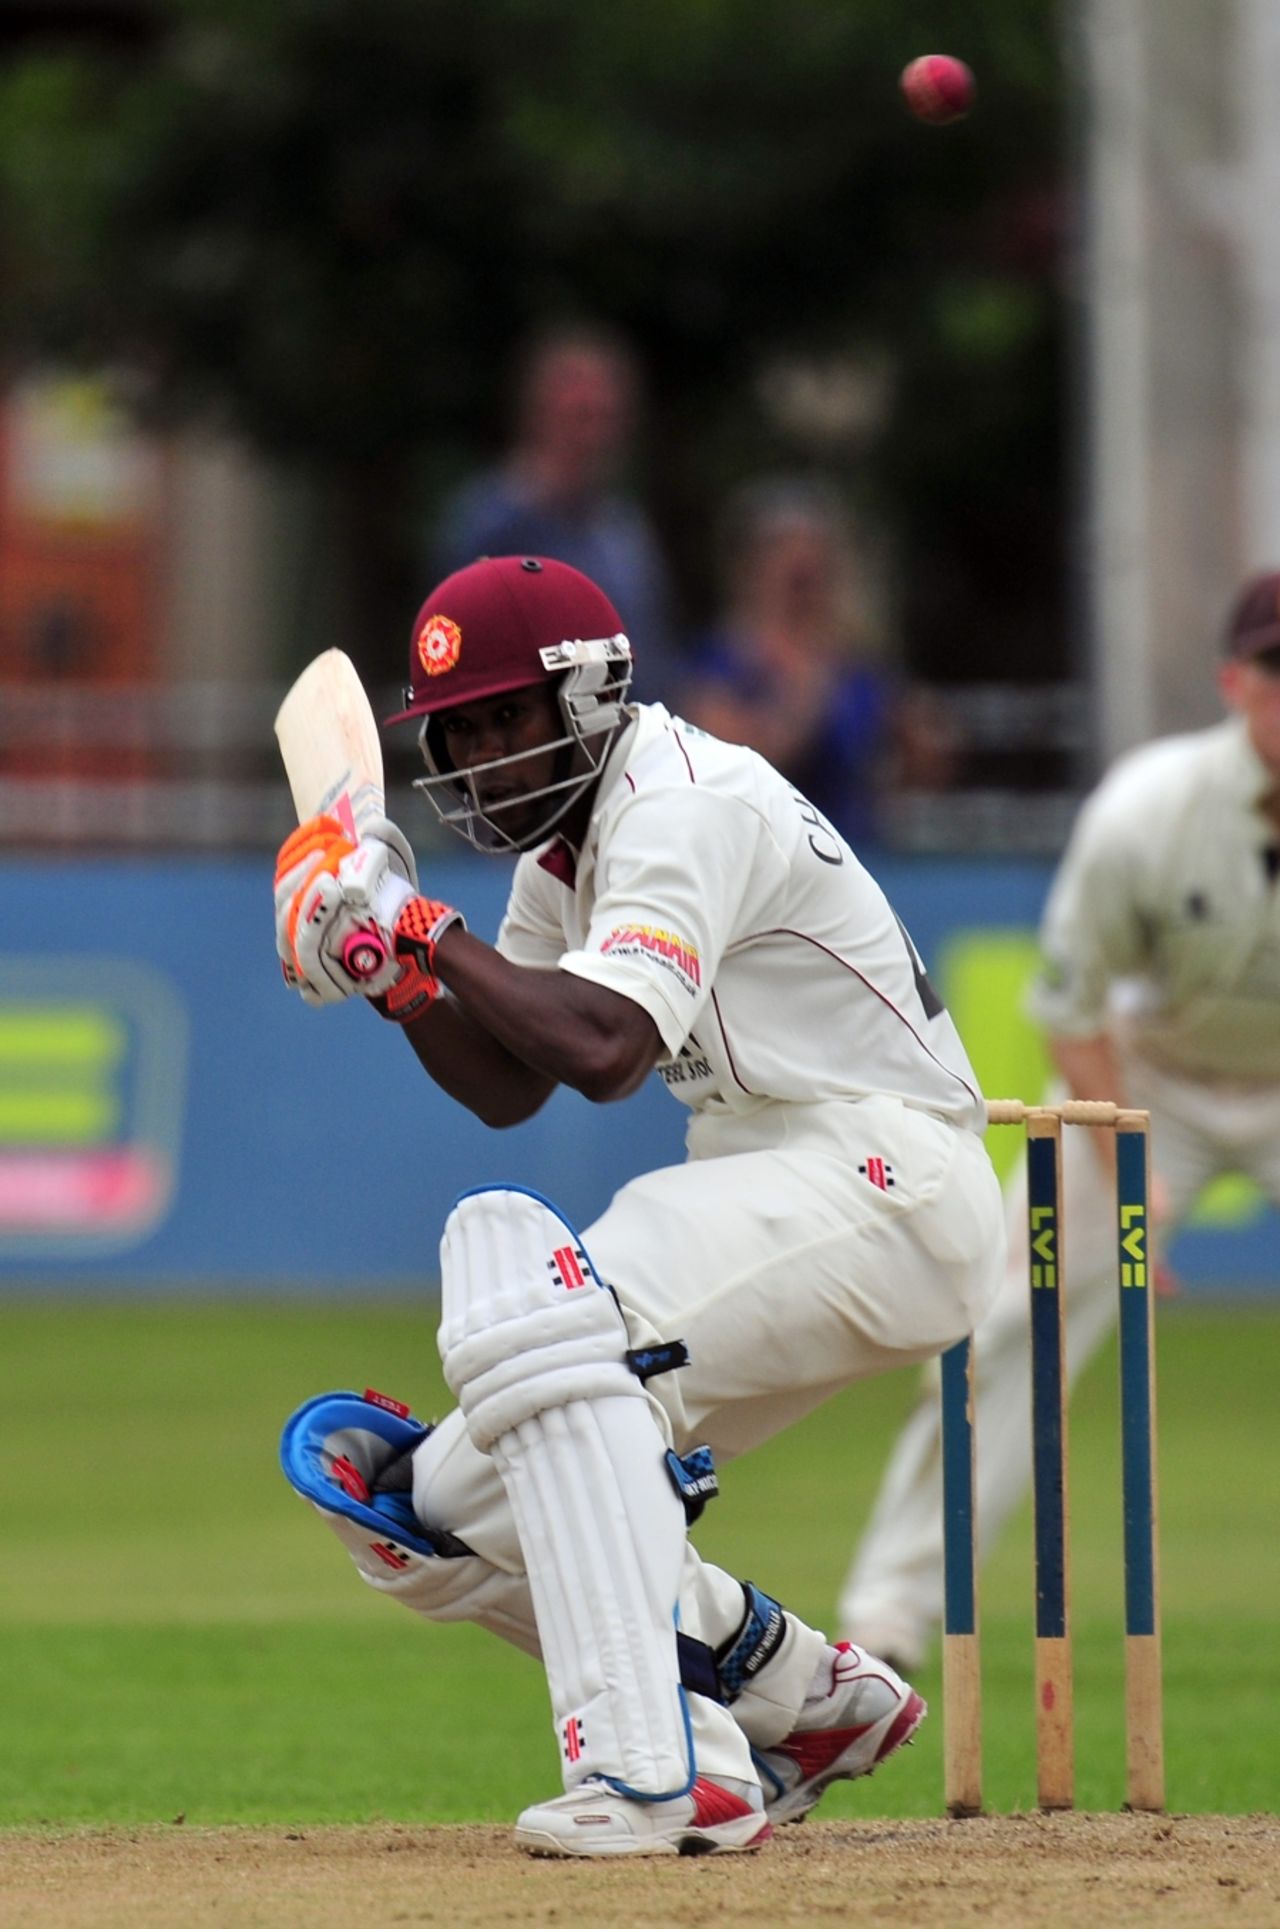 Elton Chigumbura ducks under a bouncer during his innings, Derbyshire v Northamptonshire, County Championship Division Two, Chesterfield, August 9 2010